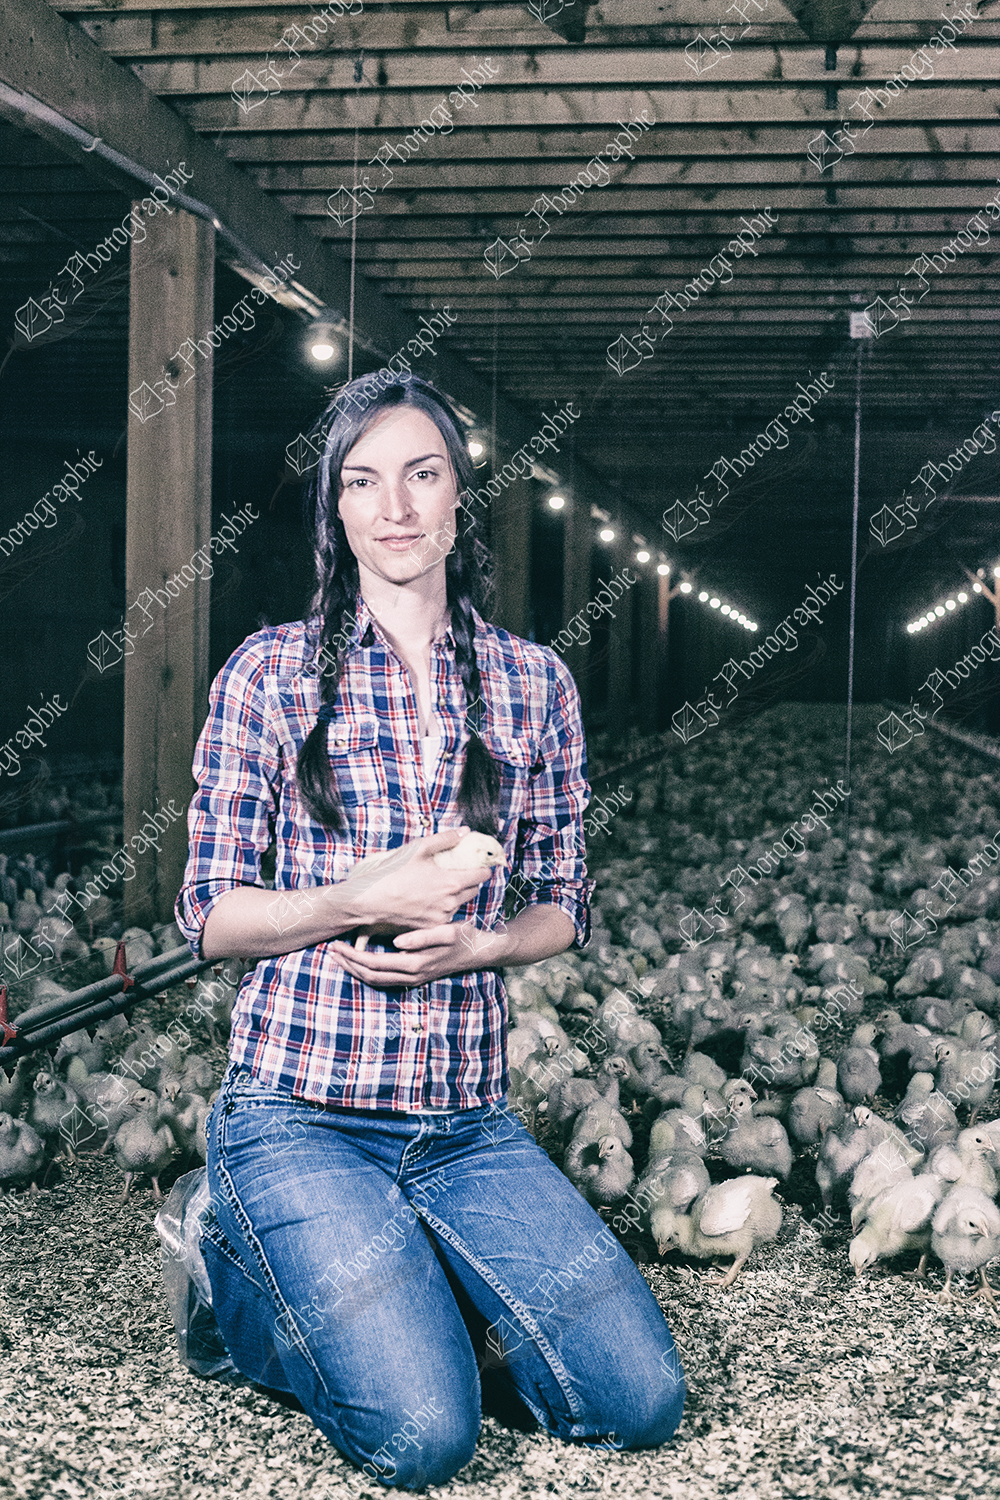 elze_photo_9079_litiere_agricultrice_poulets_chickens_farm_lady